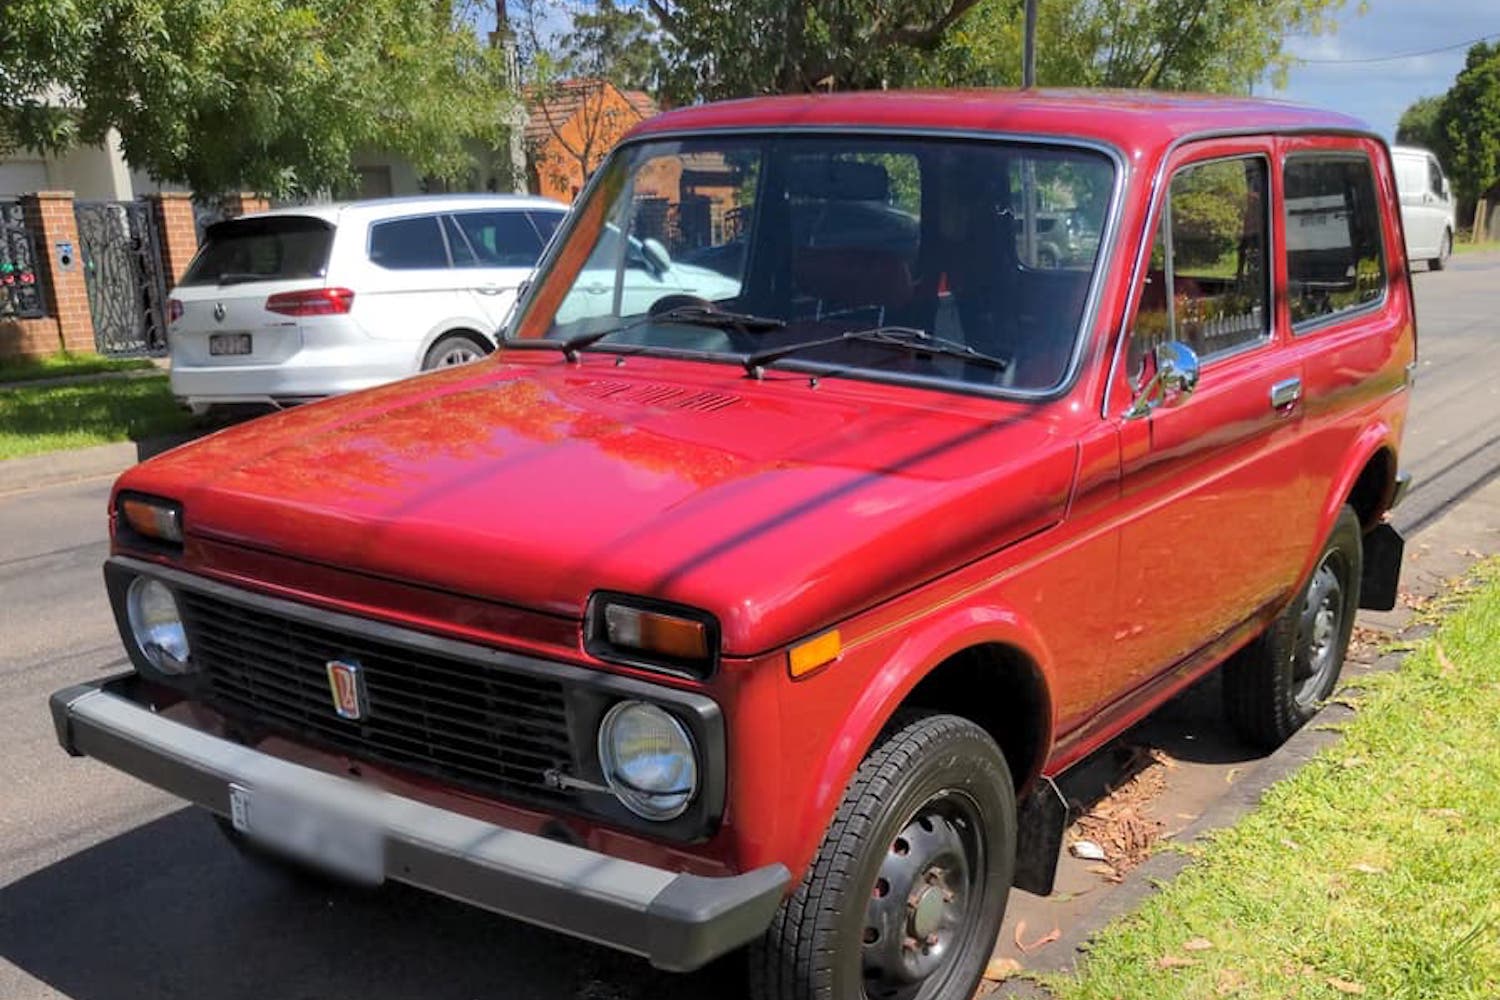 ‘Putin Approved’ Soviet 4×4 For Sale In Sydney Is The Perfect Car To Start WWIII In